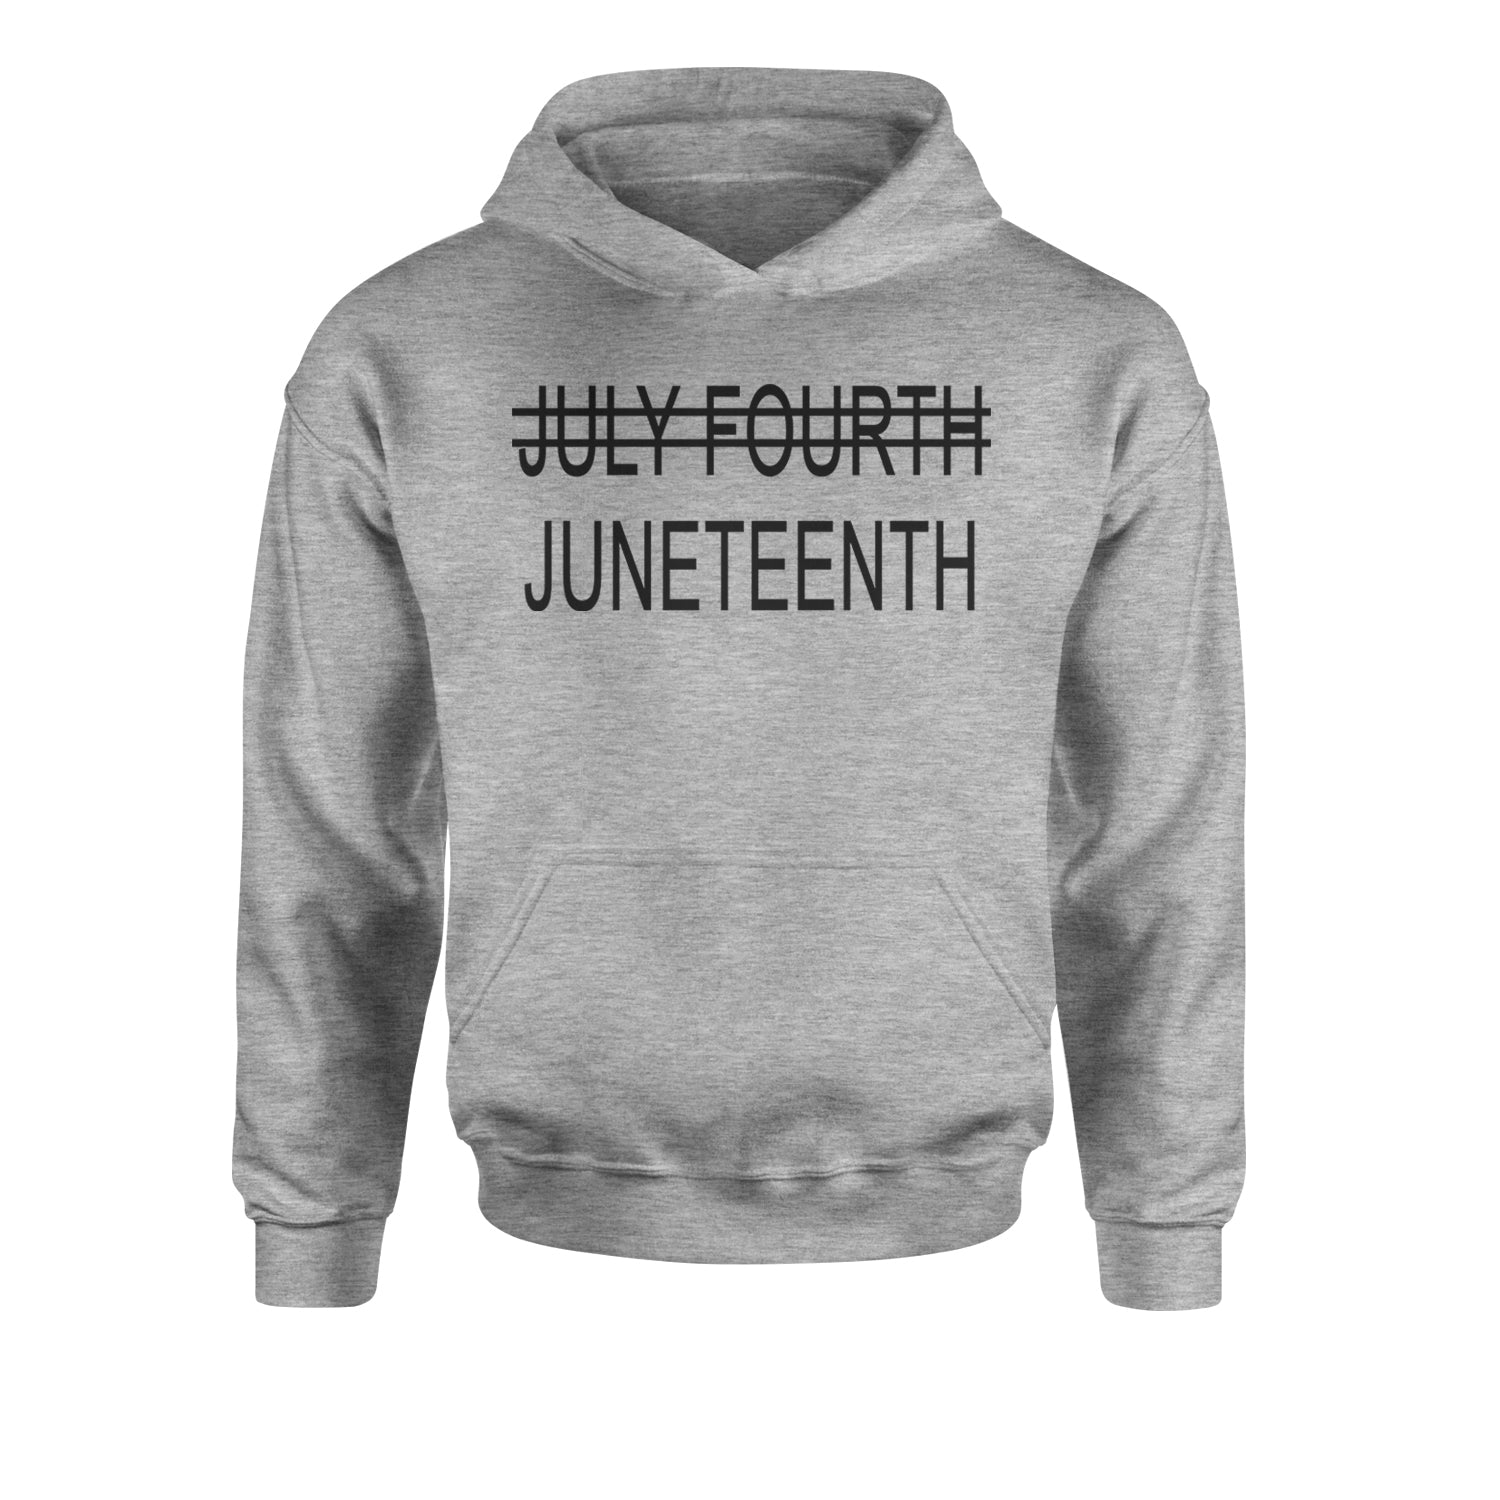 Juneteenth (July Fourth Crossed Out) Jubilee Youth-Sized Hoodie